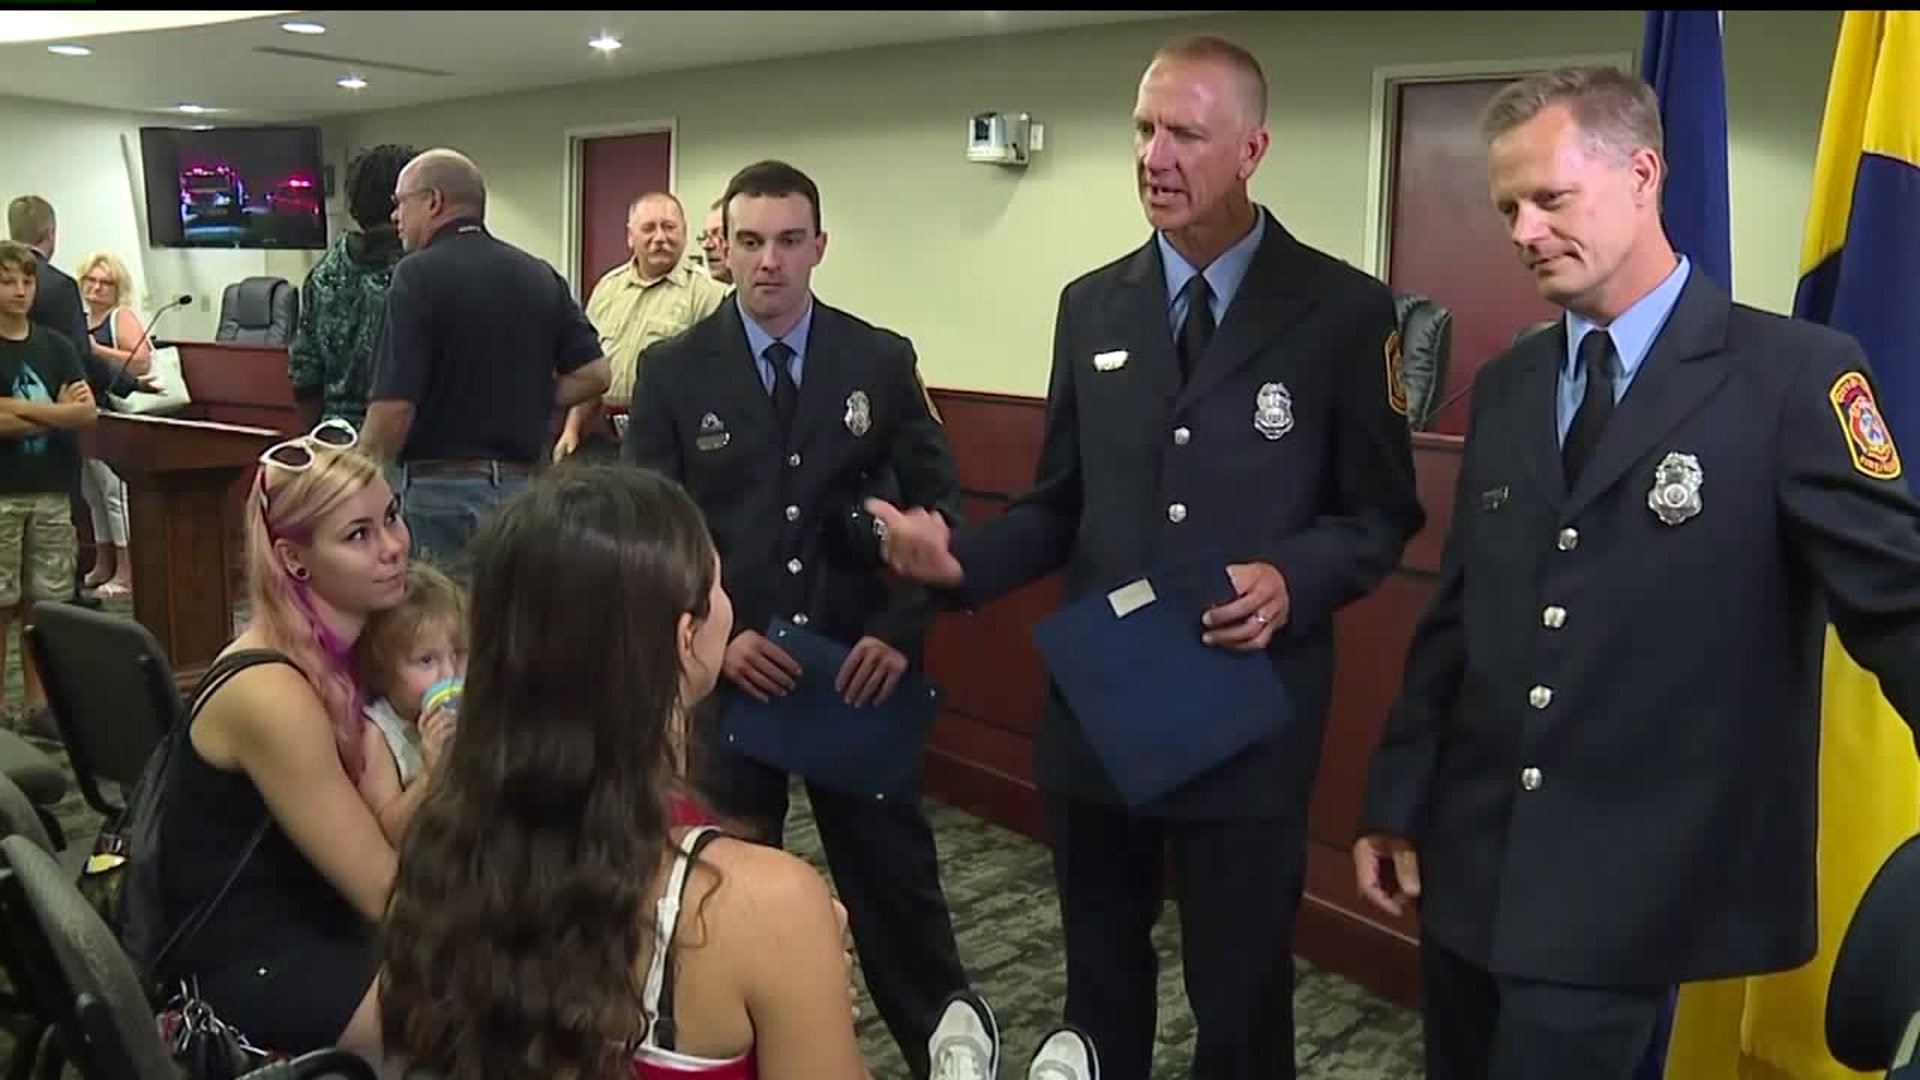 Members of the York City Fire Department are awarded at annual ceremony